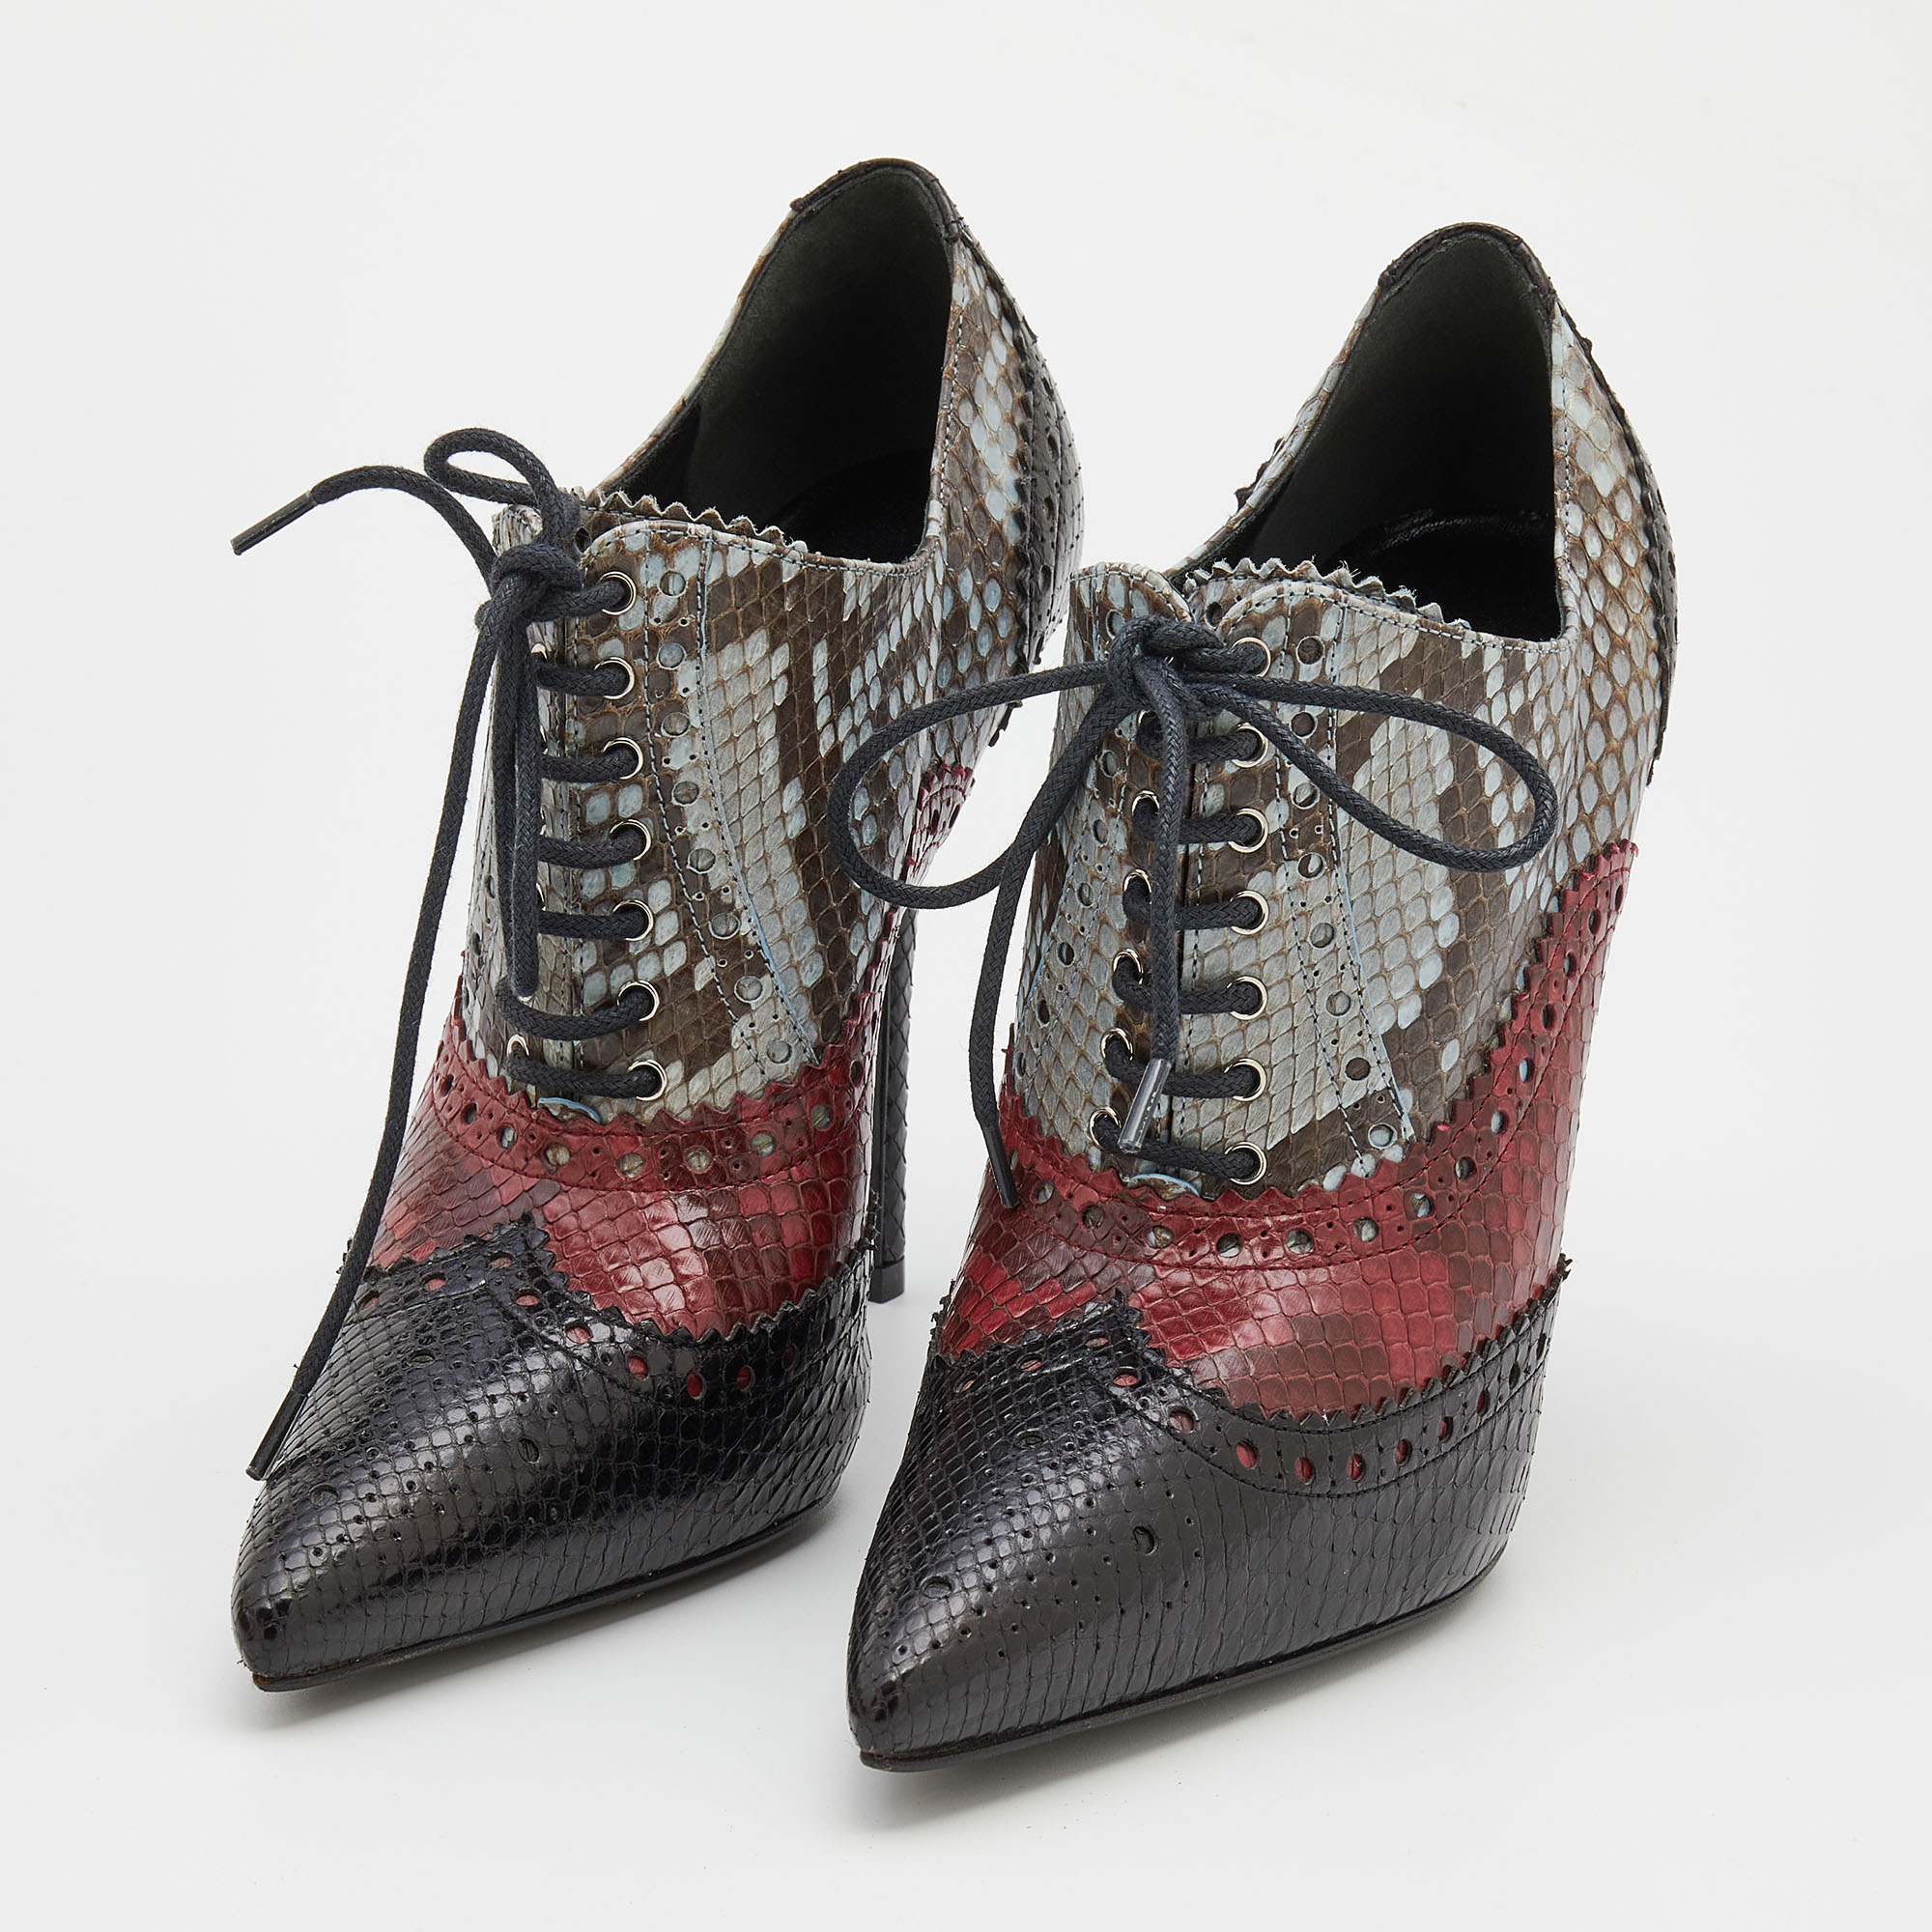 

Gucci Tricolor Brogue Python Leather Gia Pointed Toe Lace Up Ankle Booties Size, Multicolor